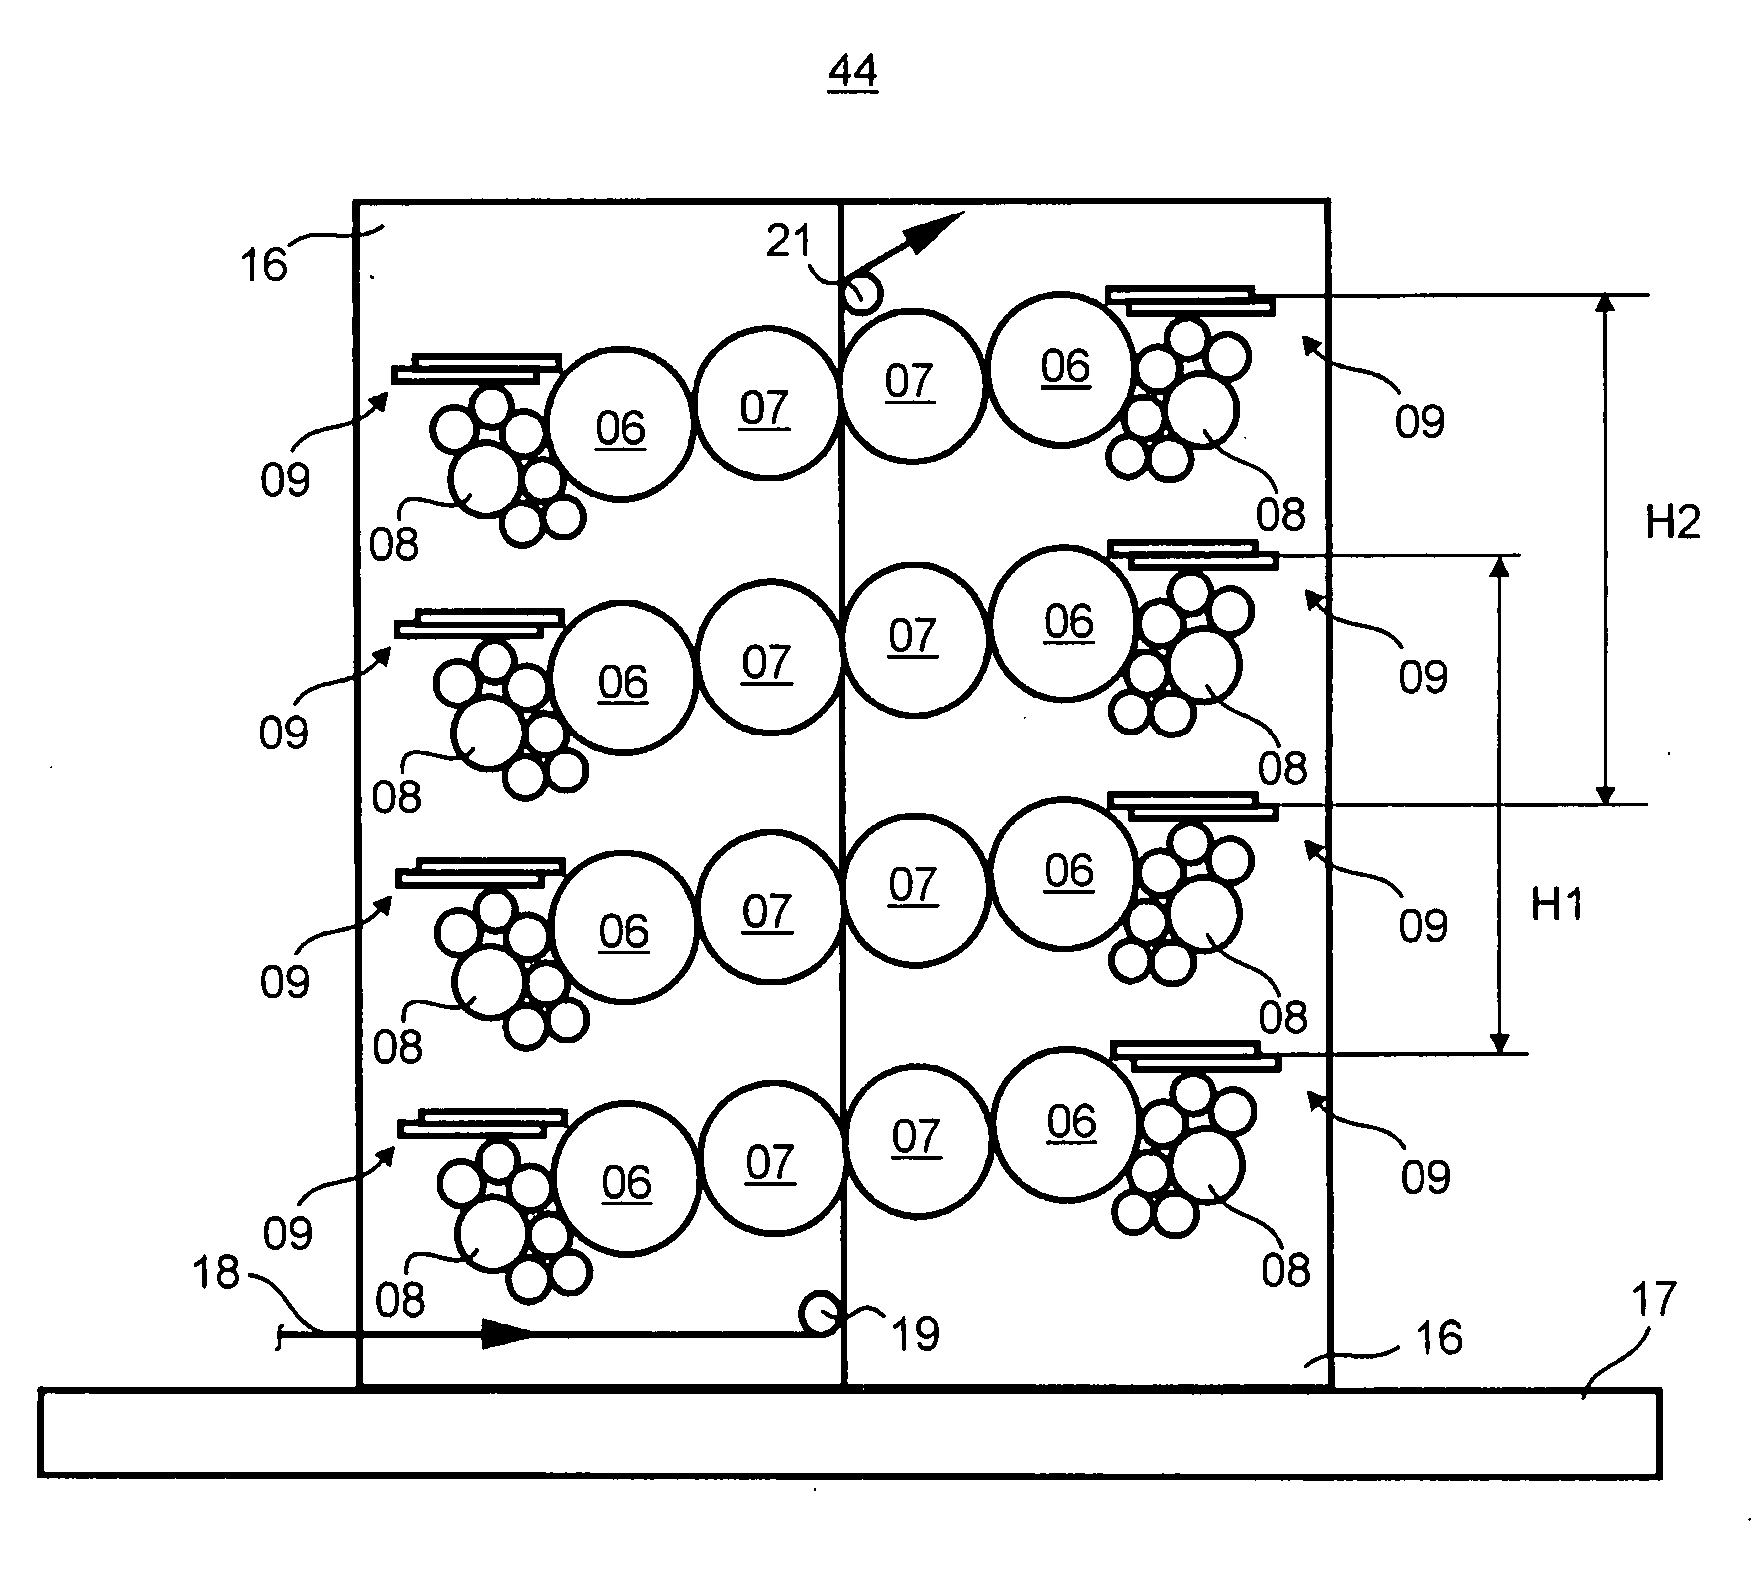 Transport system for providing printing forms to a printing press